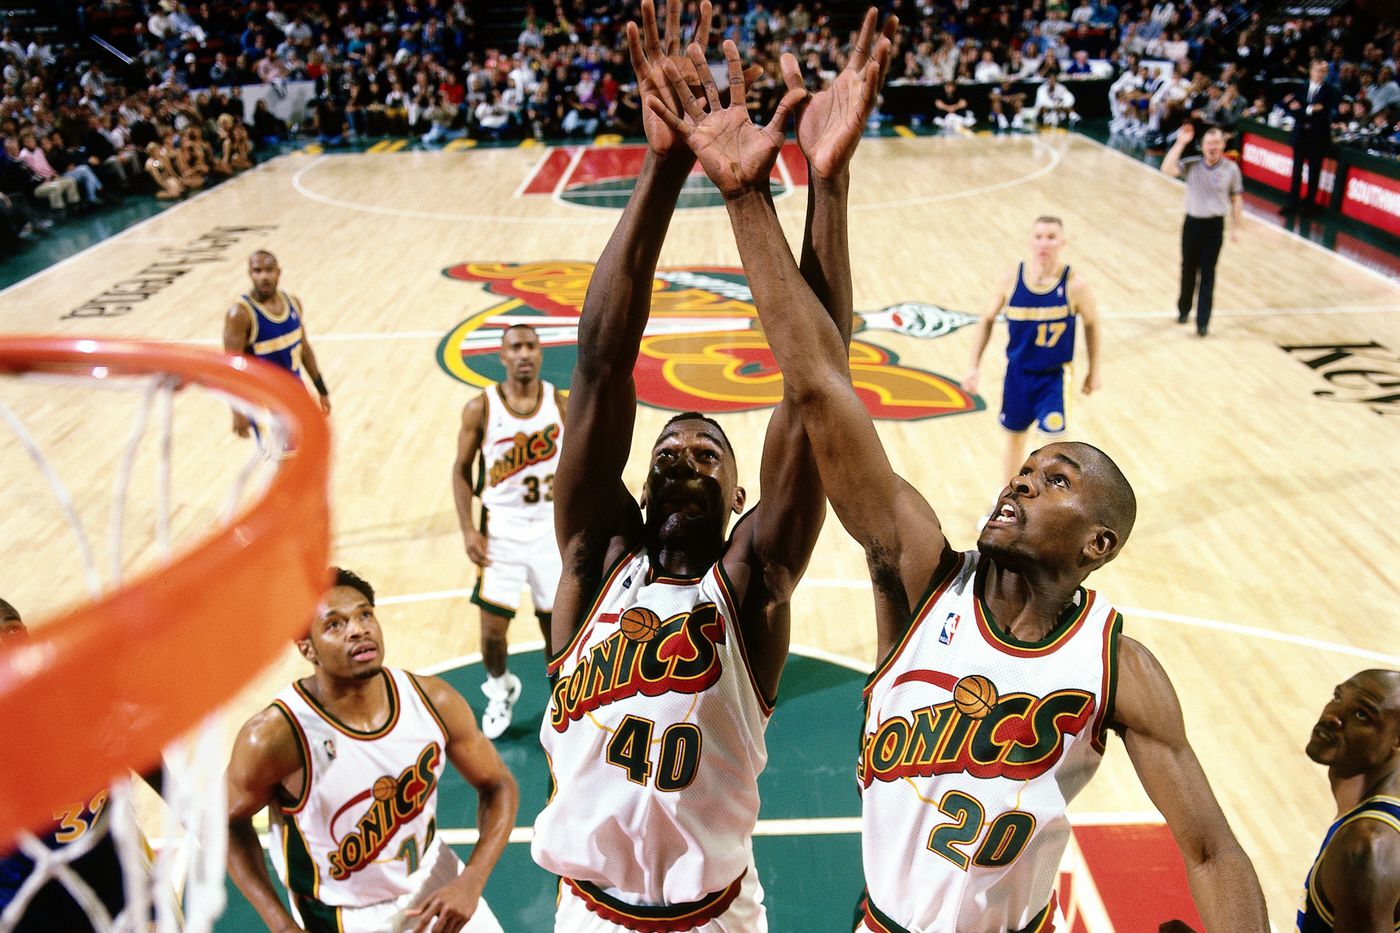 Reign of terror: Shawn Kemp, Gary Payton and the rise of the